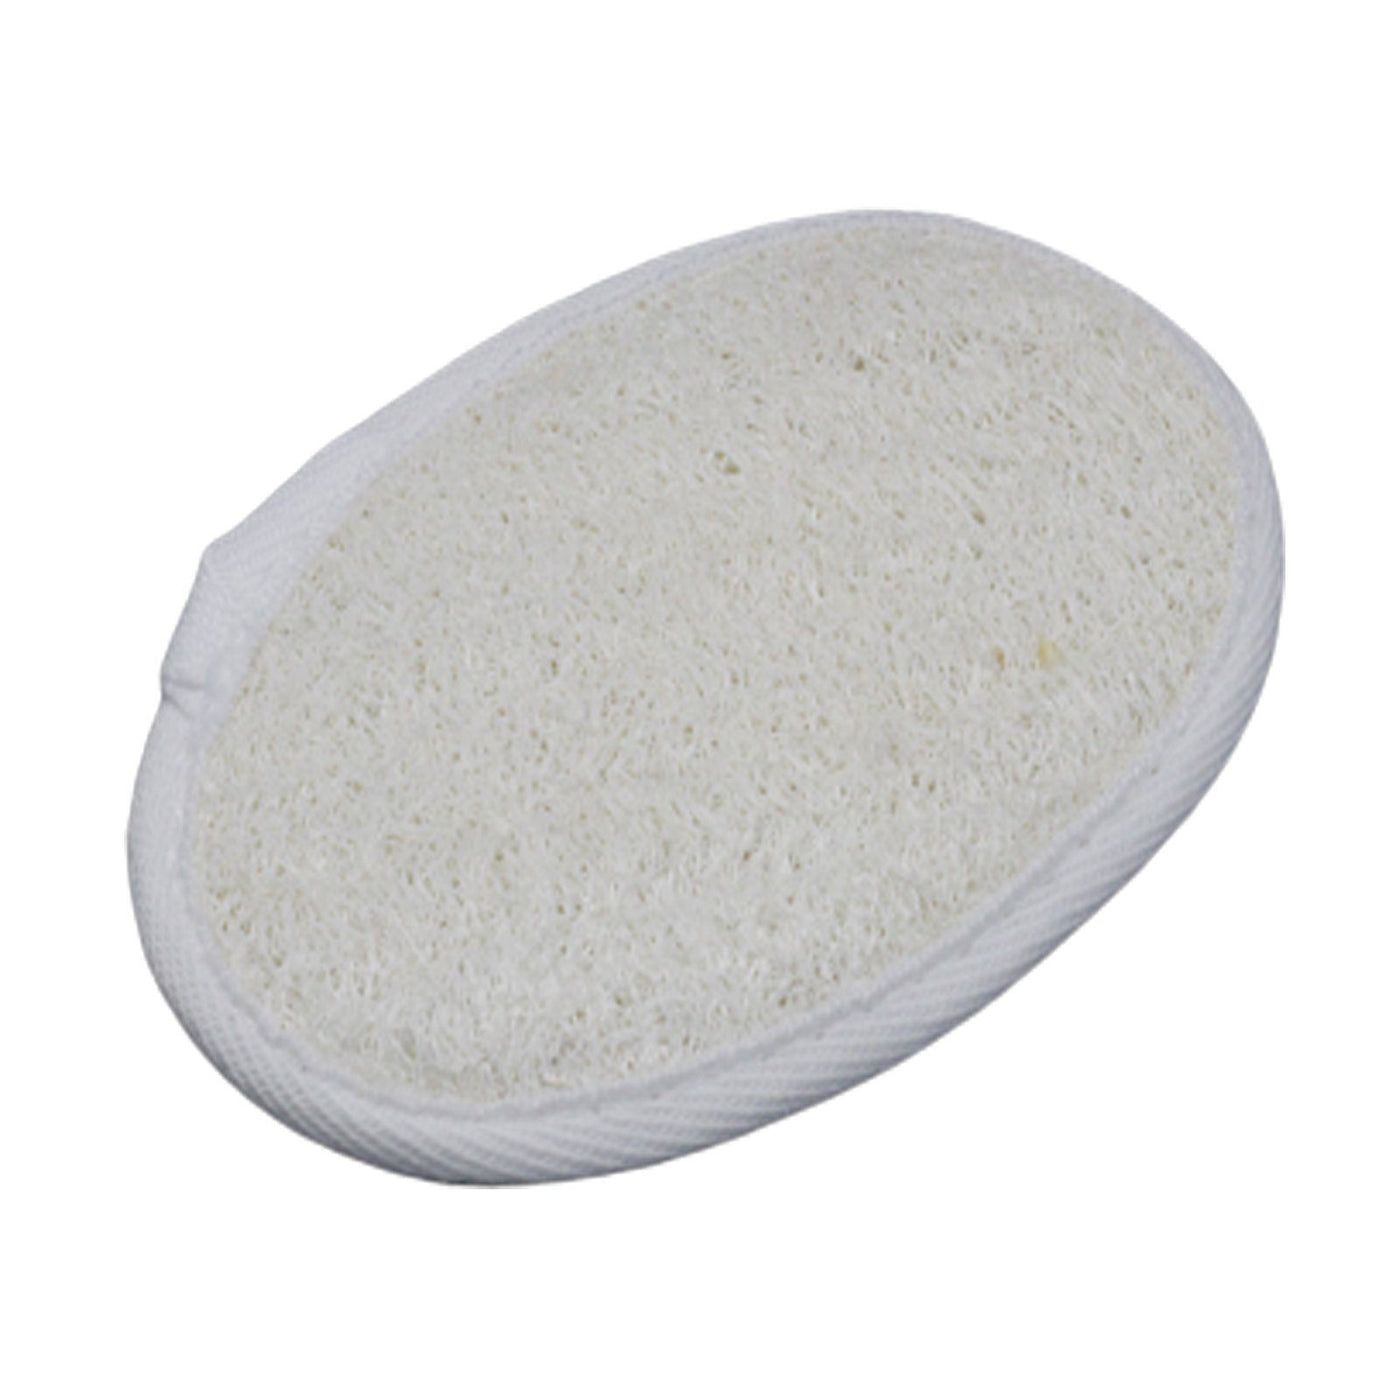 Natural Biodegradable Loofah Body Scrubs - Oval.